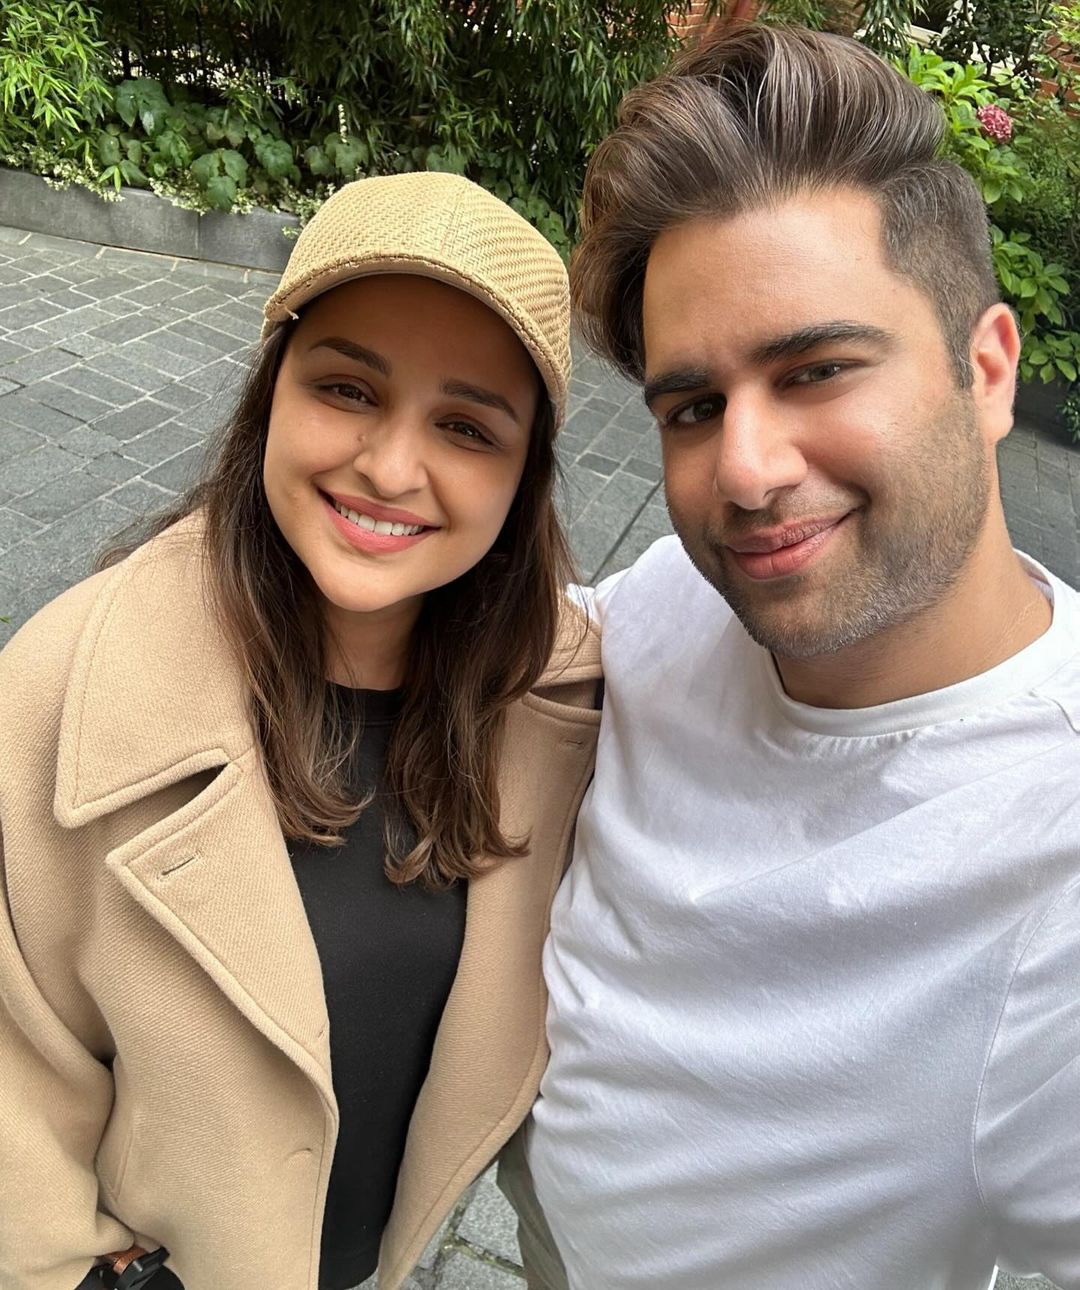 Bigg Boss 15: Fame Rajiv Adatia Spent A Great Time With Bollywood Actress Parineeti Chopra In London. Their Shared Picture Goes Viral On The Internet. Check It Out!